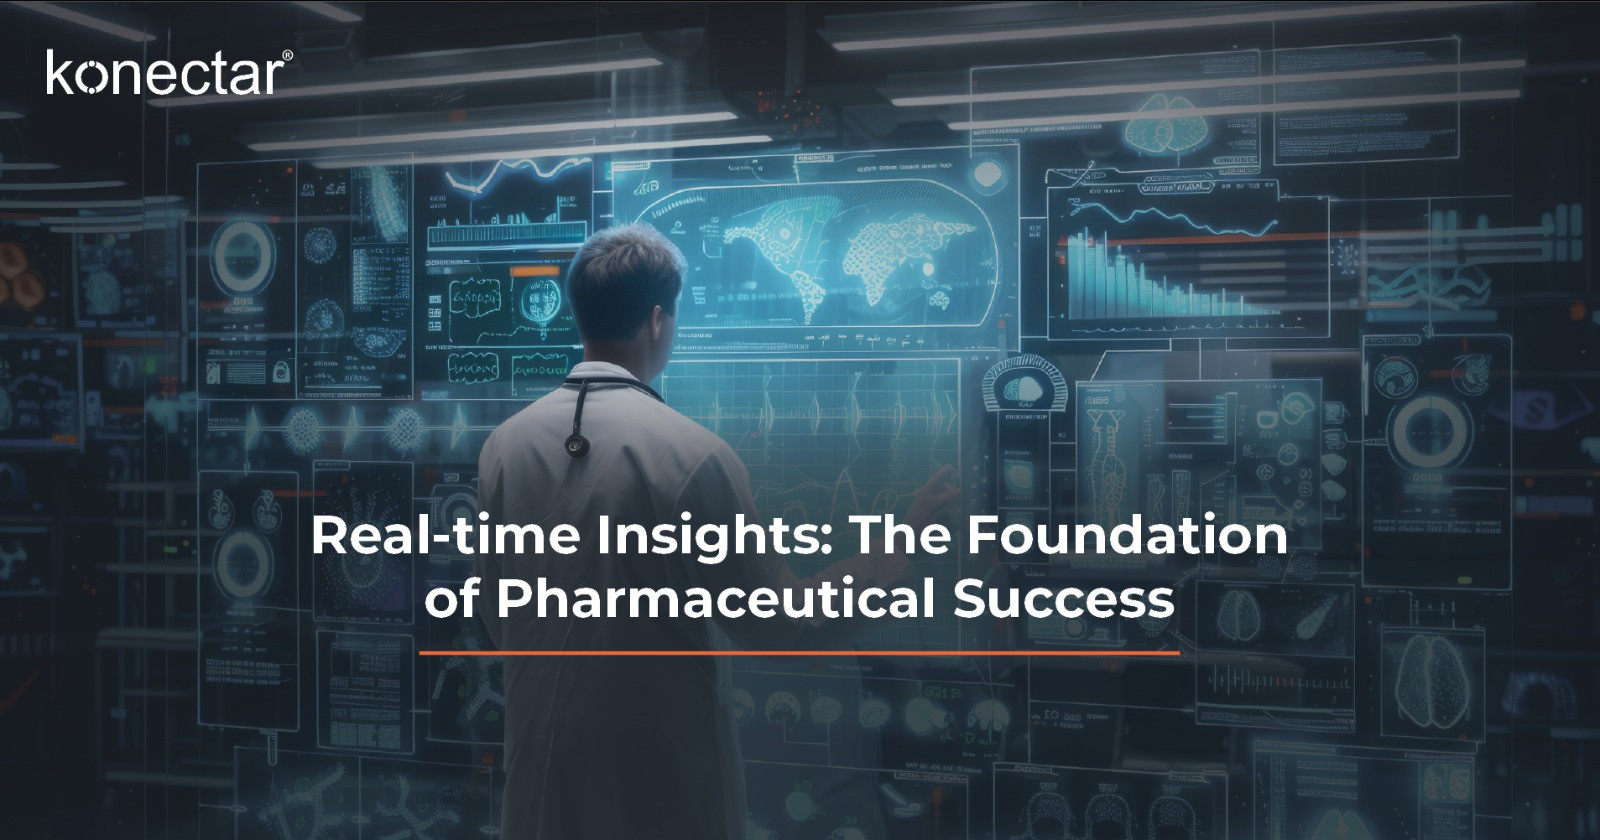 Real-time Insights: The Foundation of Pharmaceutical Success